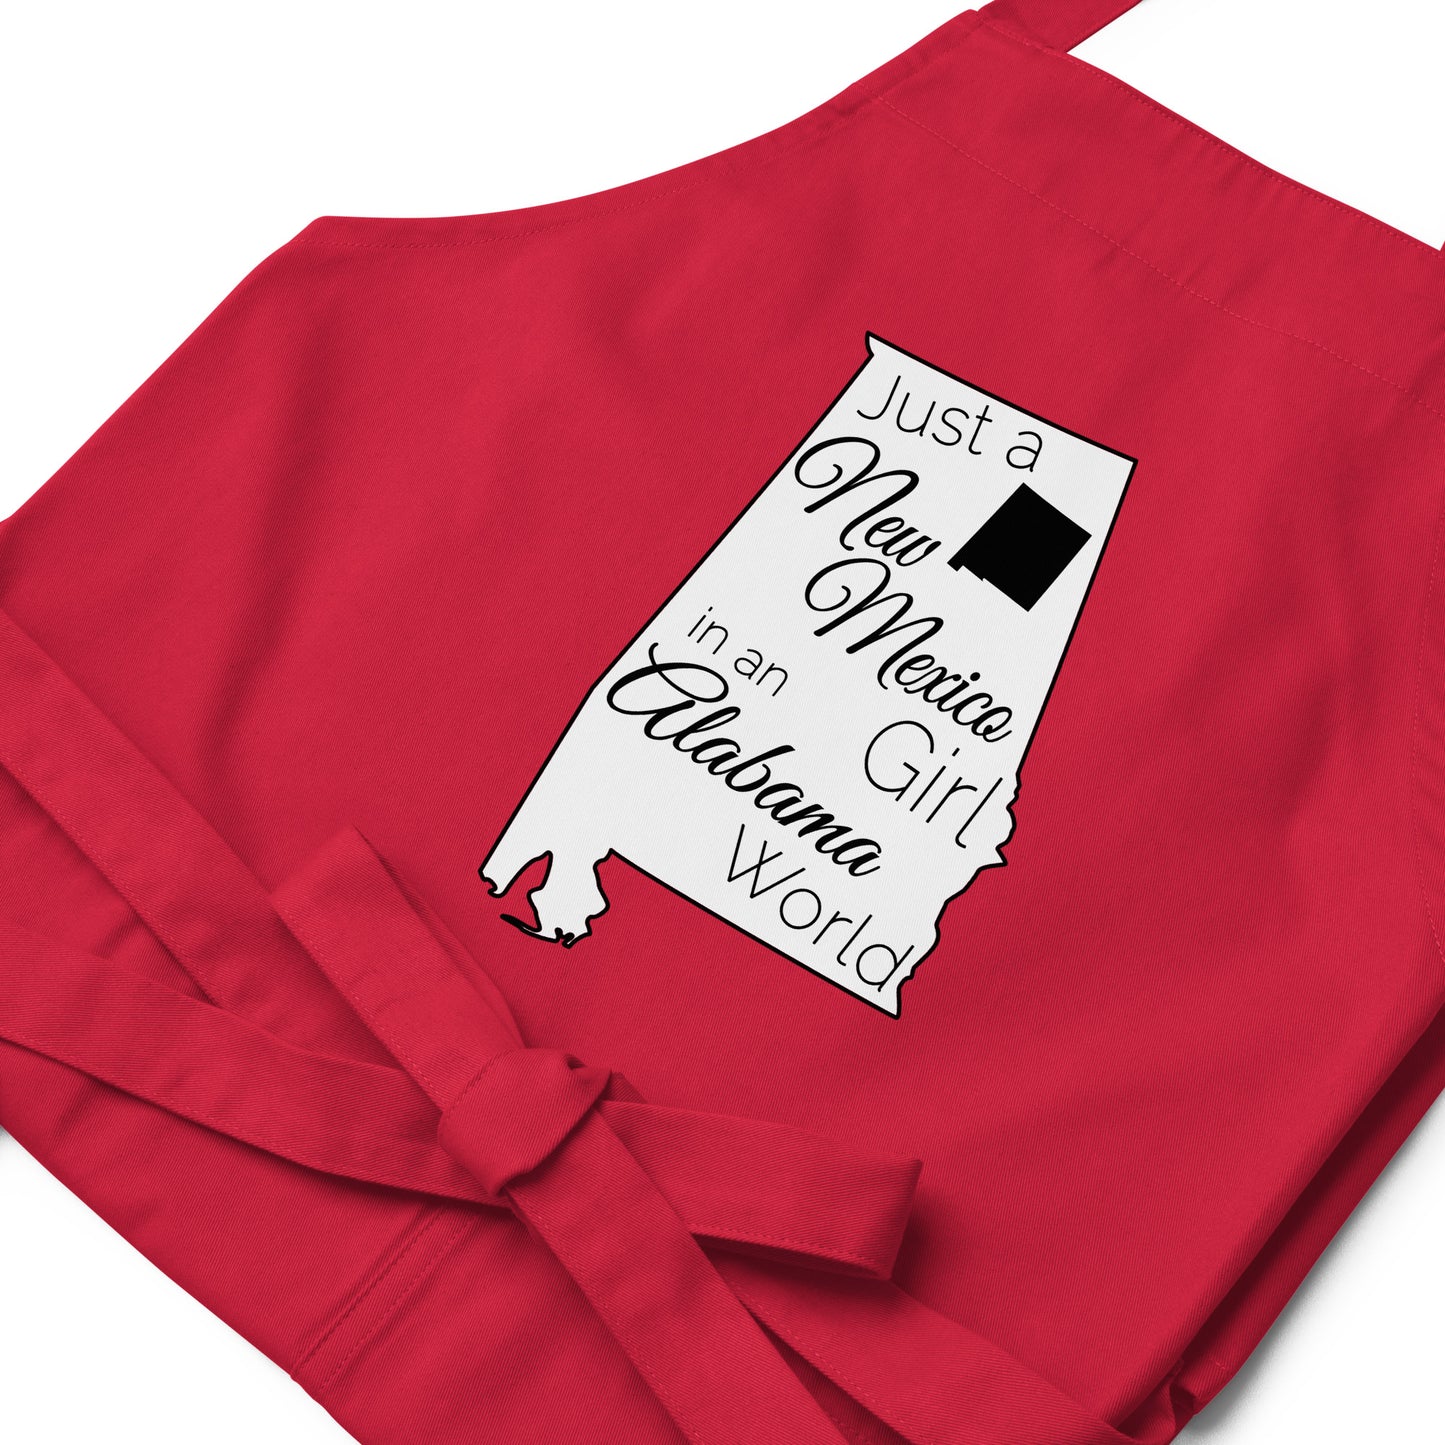 Just a New Mexico Girl in an Alabama World Organic cotton apron